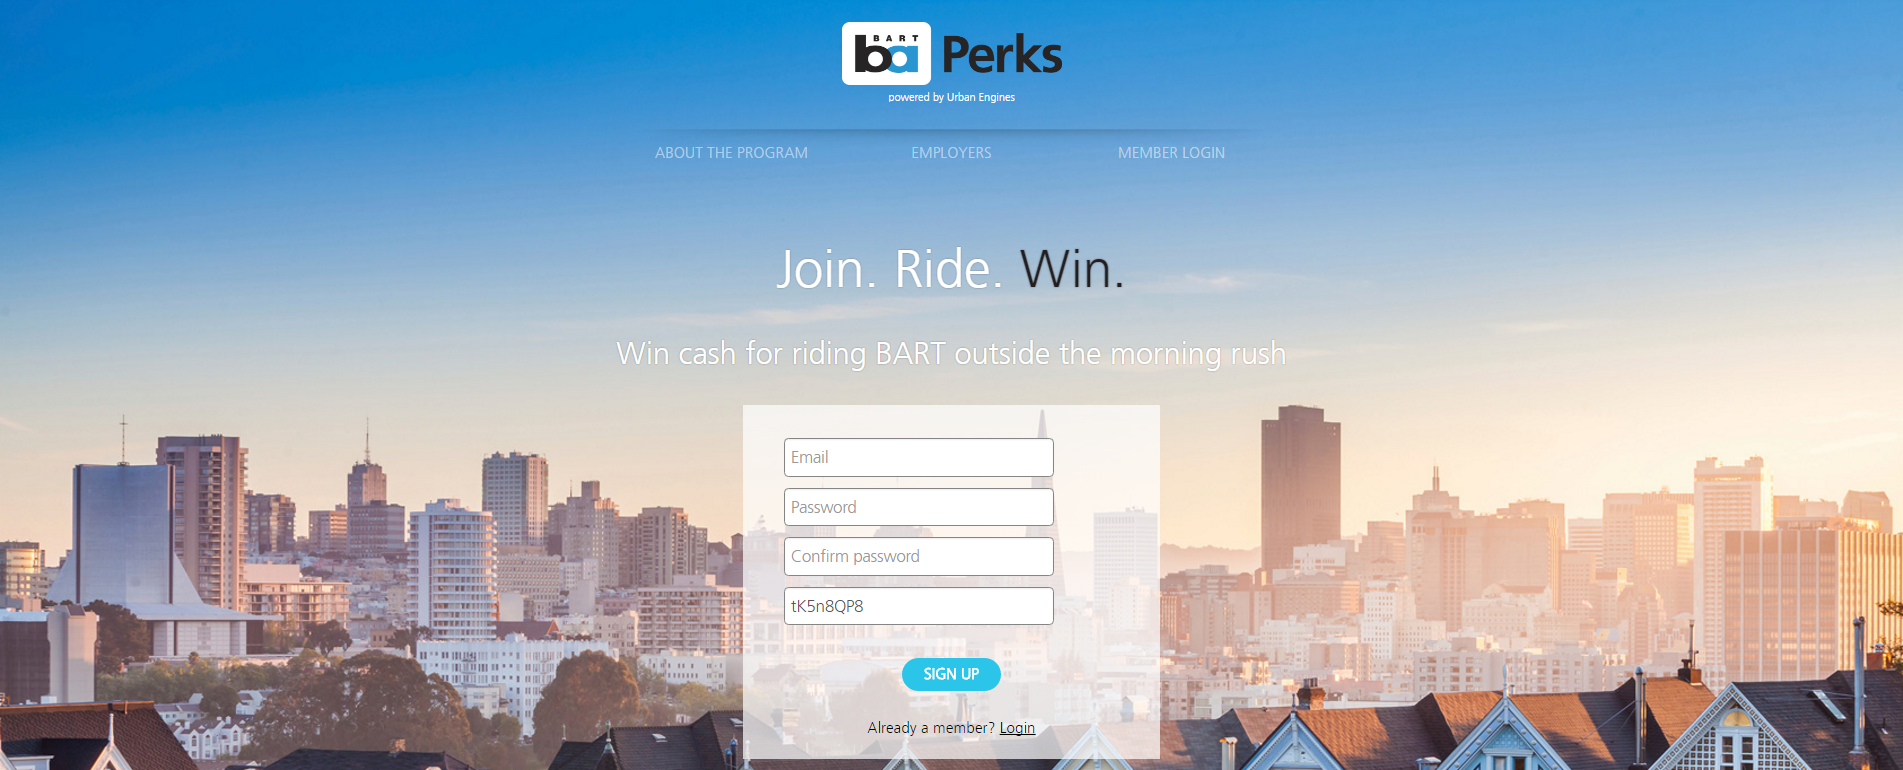 bart-perks-home-page